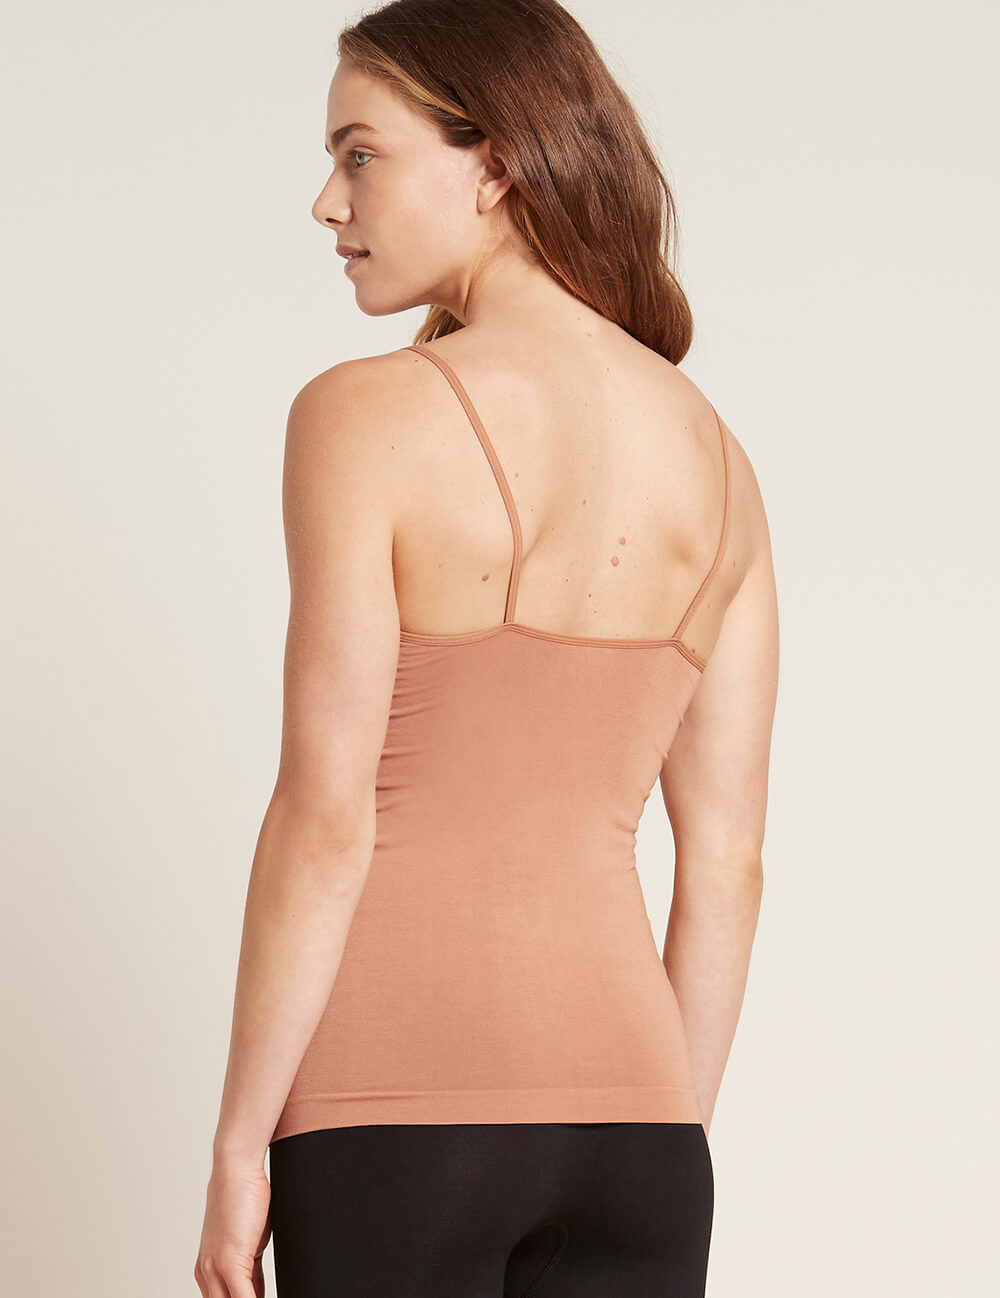 Boody Bamboo Womens Cami Camisole Tank Top Shirt in Nude 2 Rear View